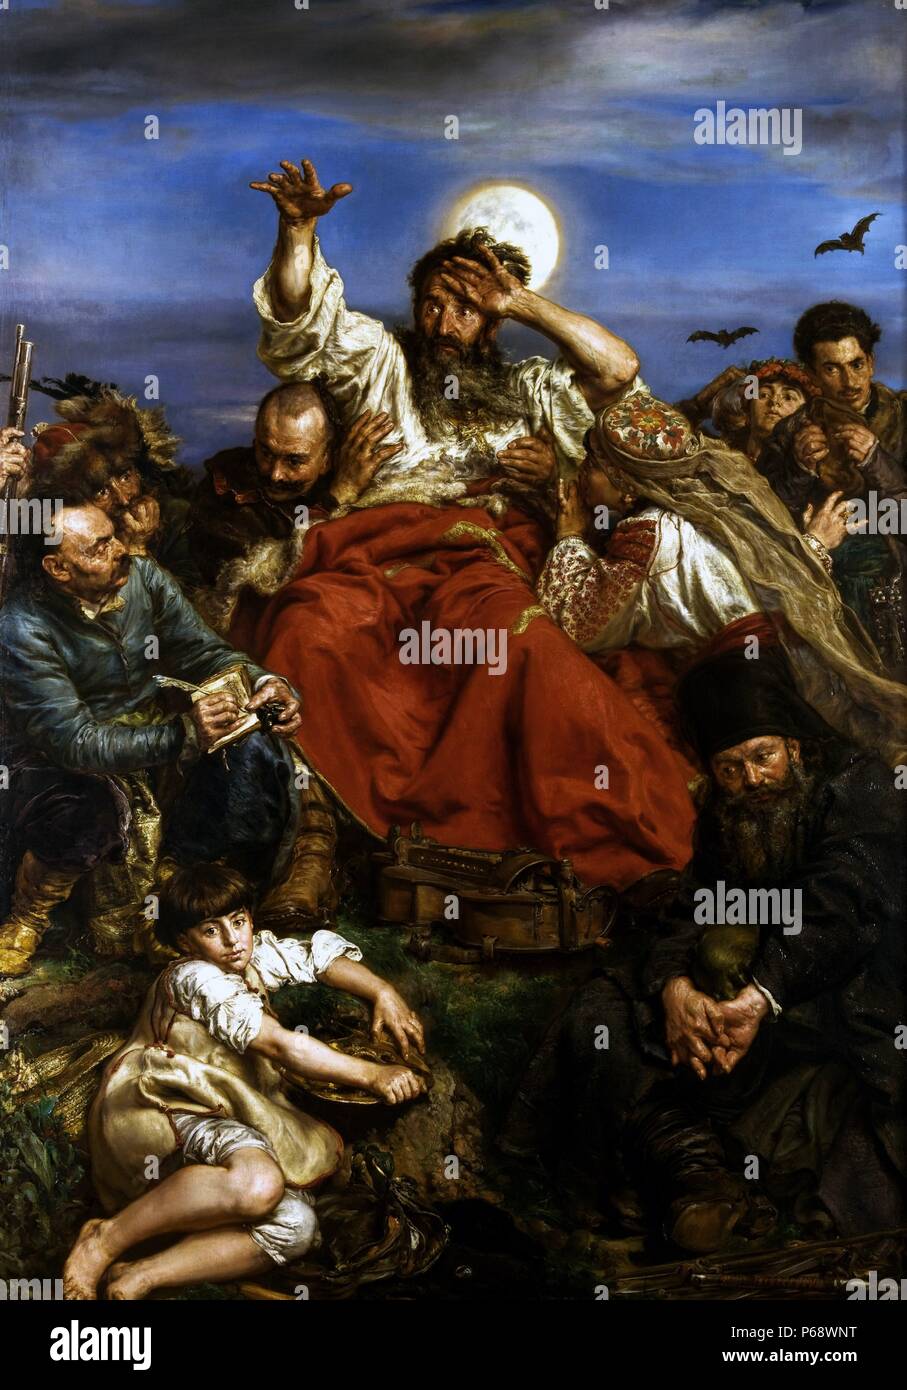 Wernyhora 1883–1884 by Jan Matejko (1838–1893). Wernyhora was a legendary 18th century Cossack bard who prophesized the fall of Poland as well as its eventual rebirth. Stock Photo